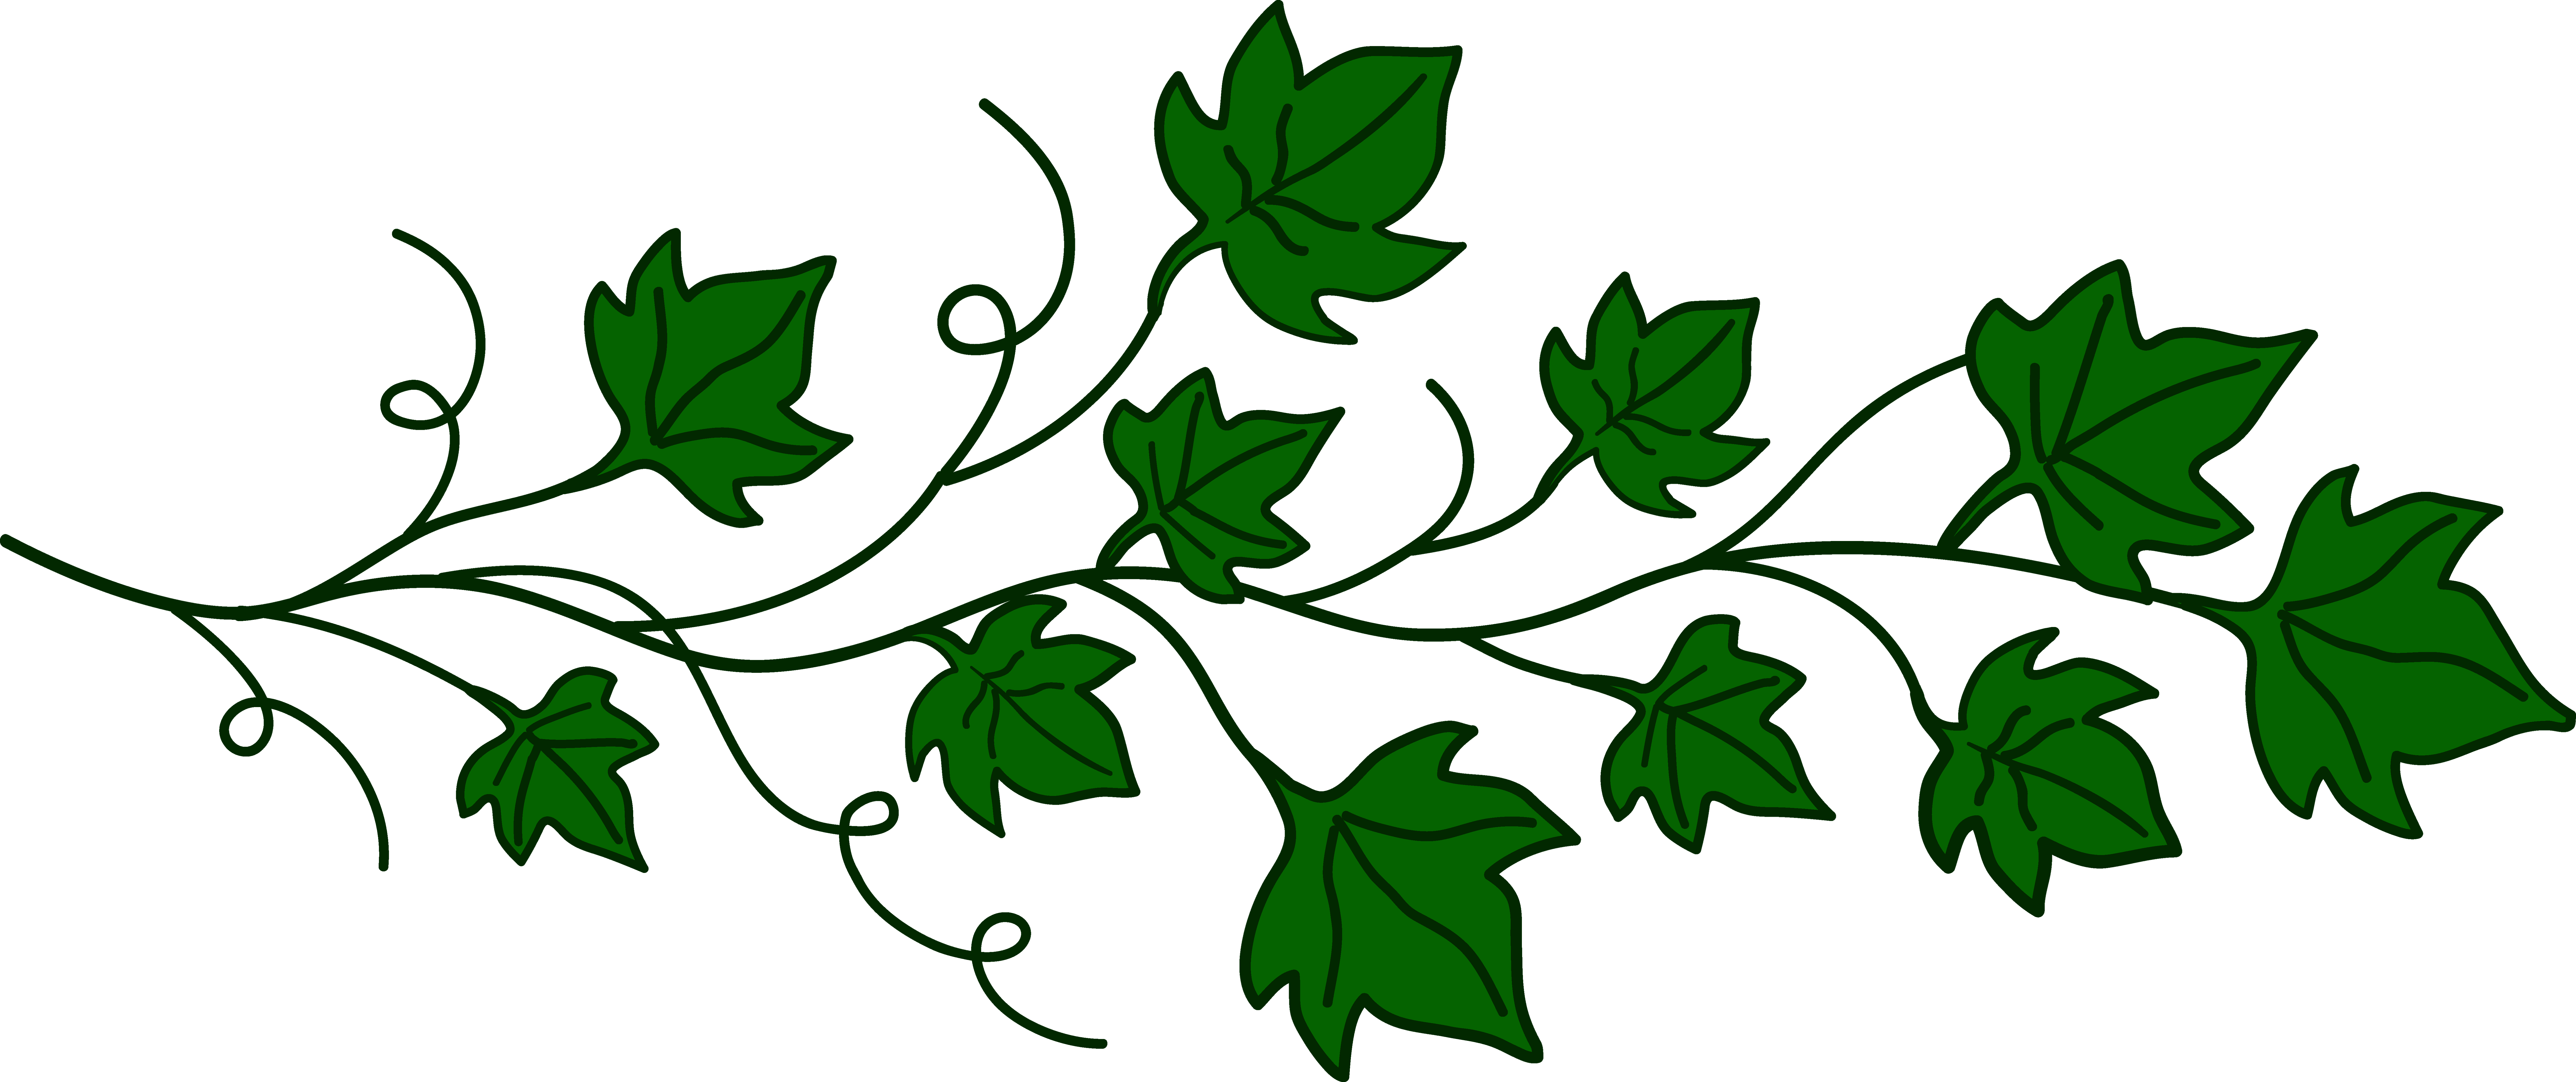 clipart flowers and leaves - photo #44